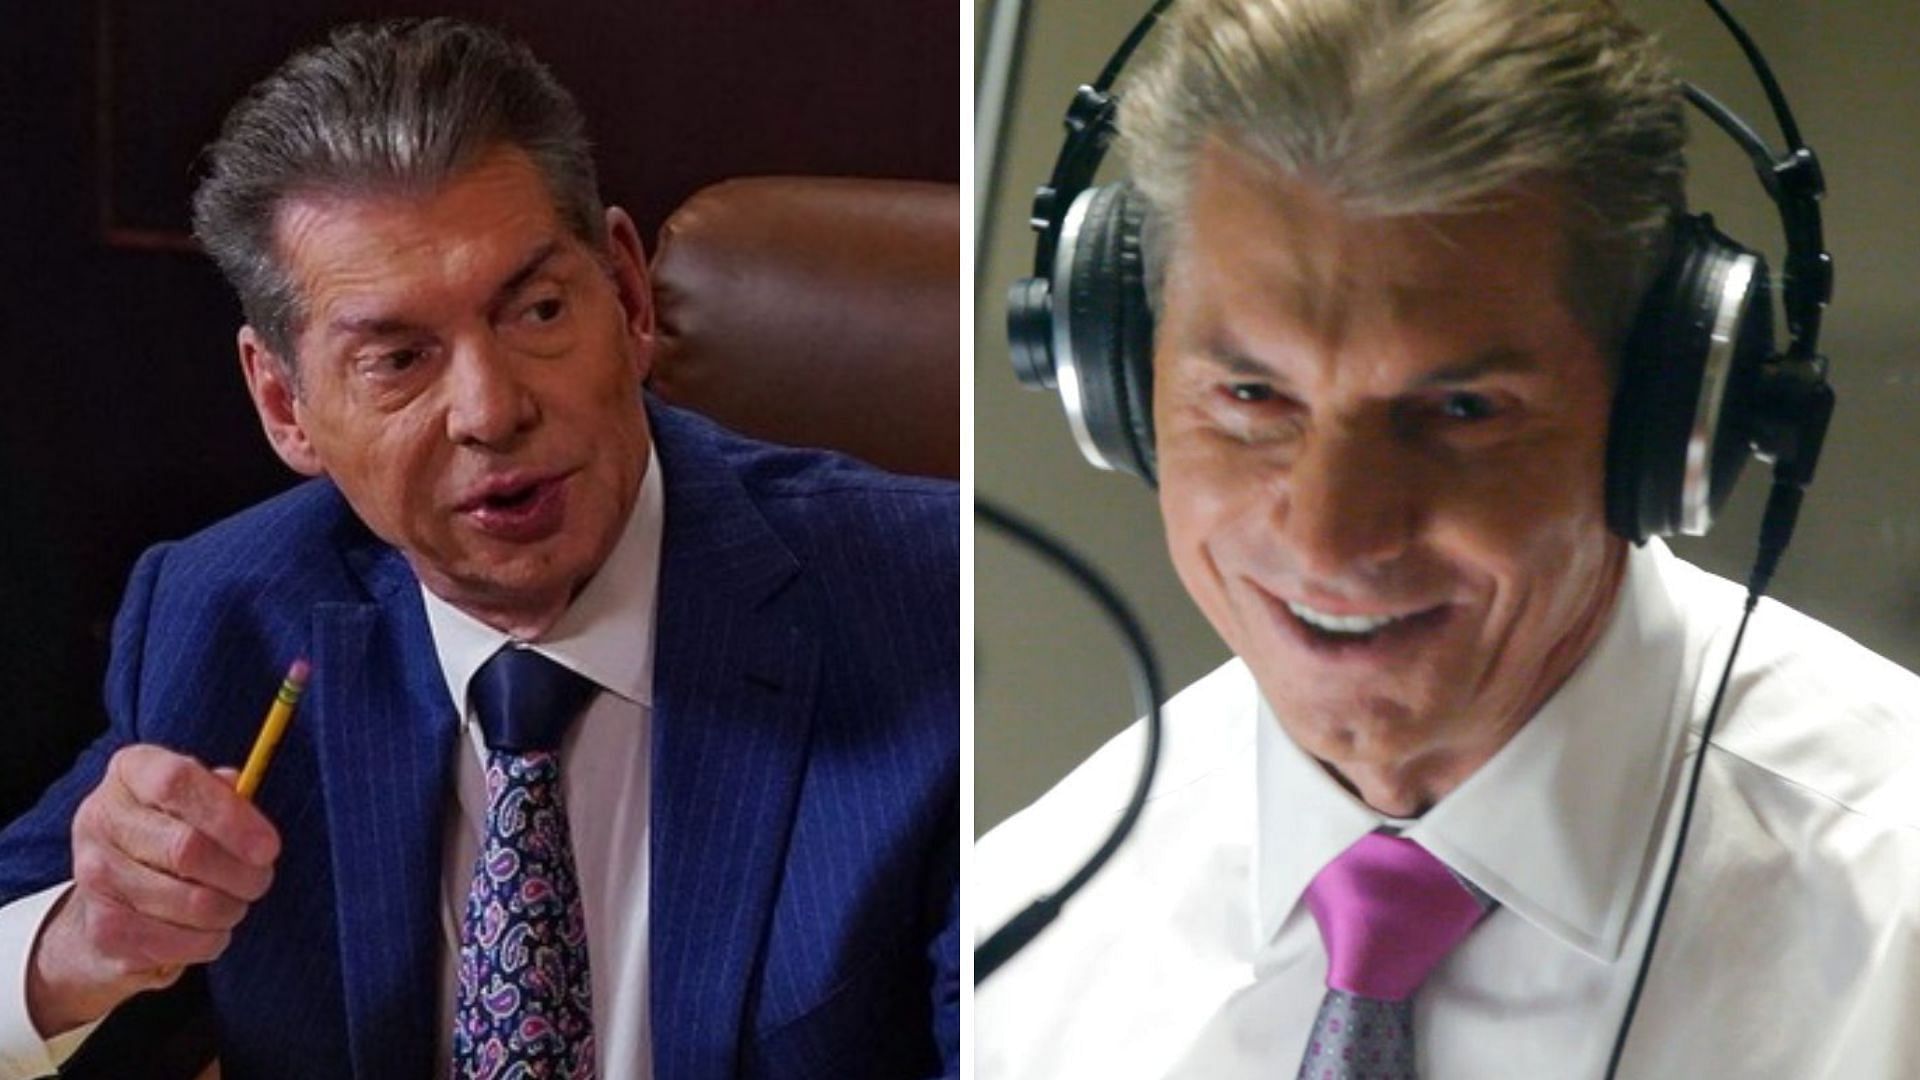 Vince McMahon recently returned to the company after resigning in July